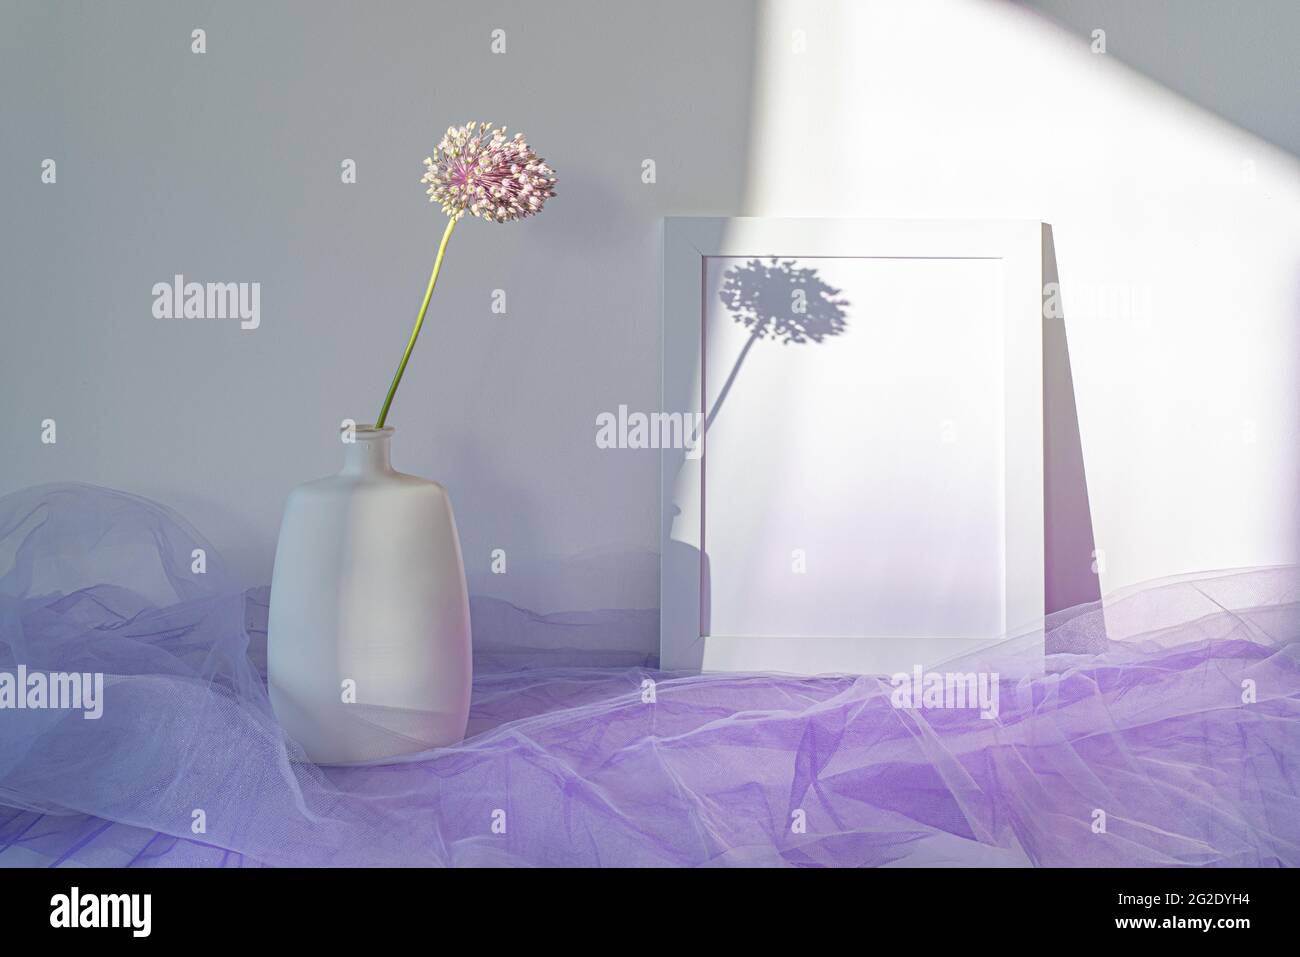 Empty white picture frame mockup. Modern and elegant vase with allium ampeloprasum flower in sunlight with long shadows. Minimal and white interior de Stock Photo